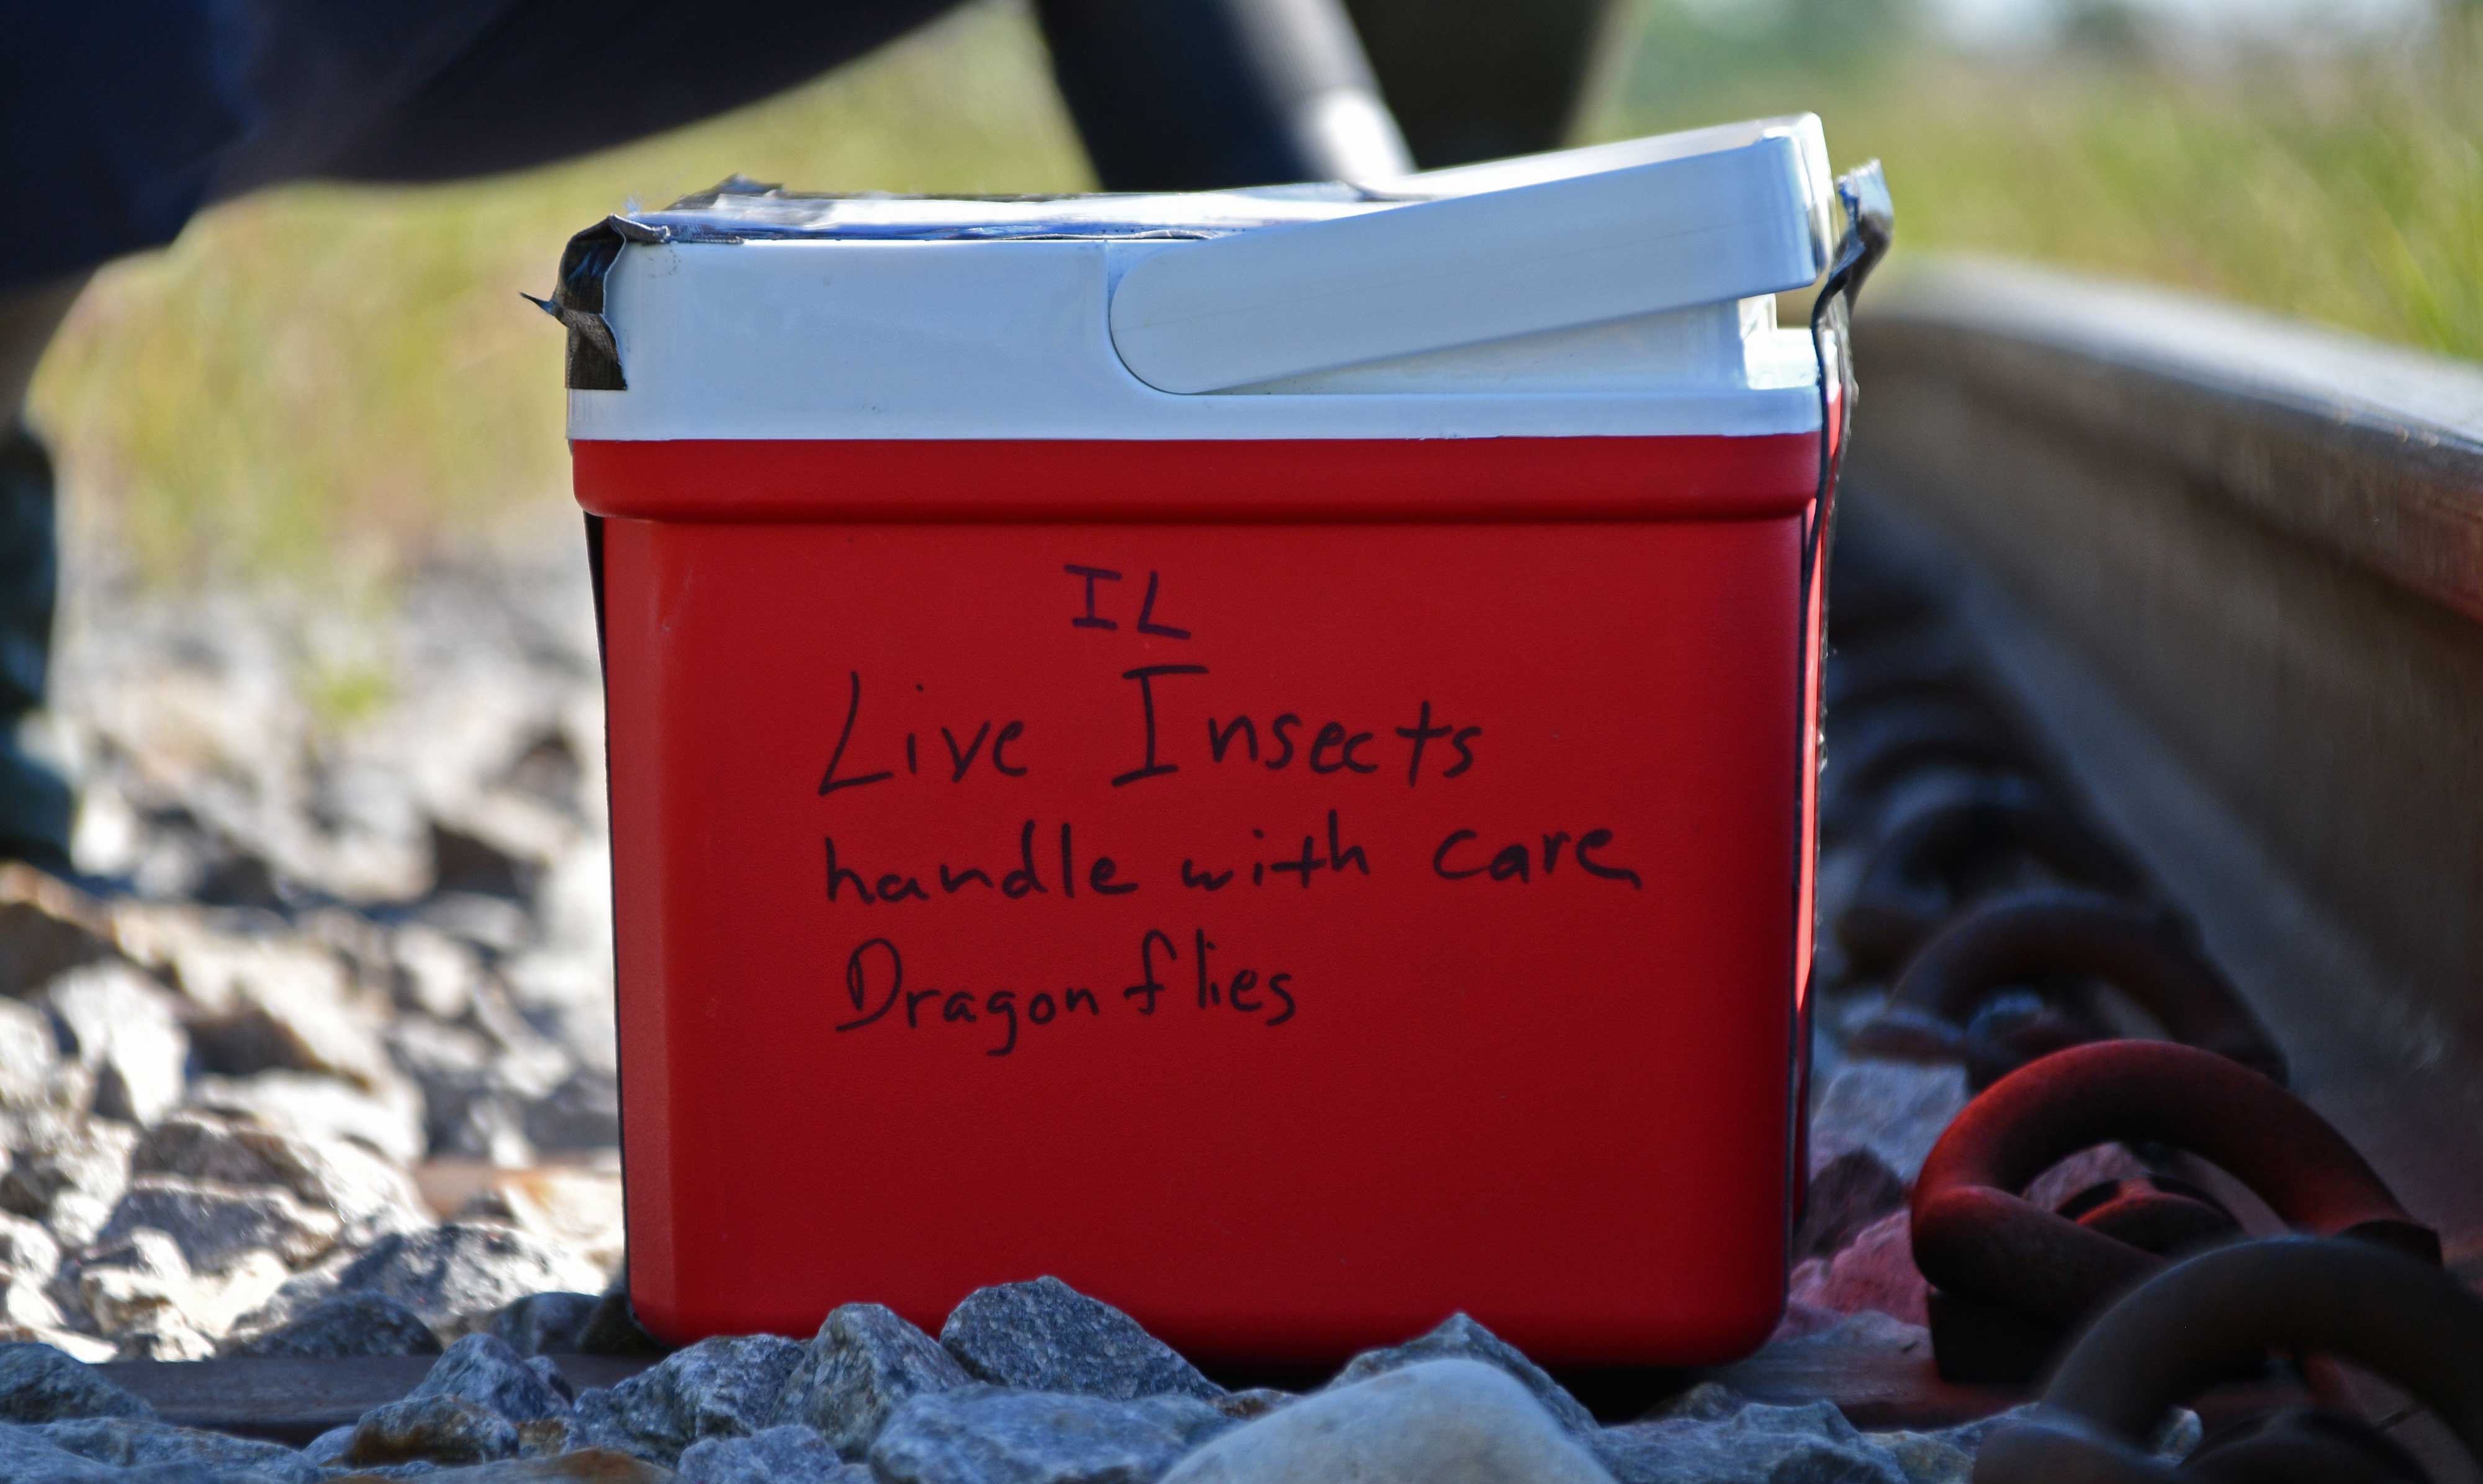 A container with Hine's emerald larvae.